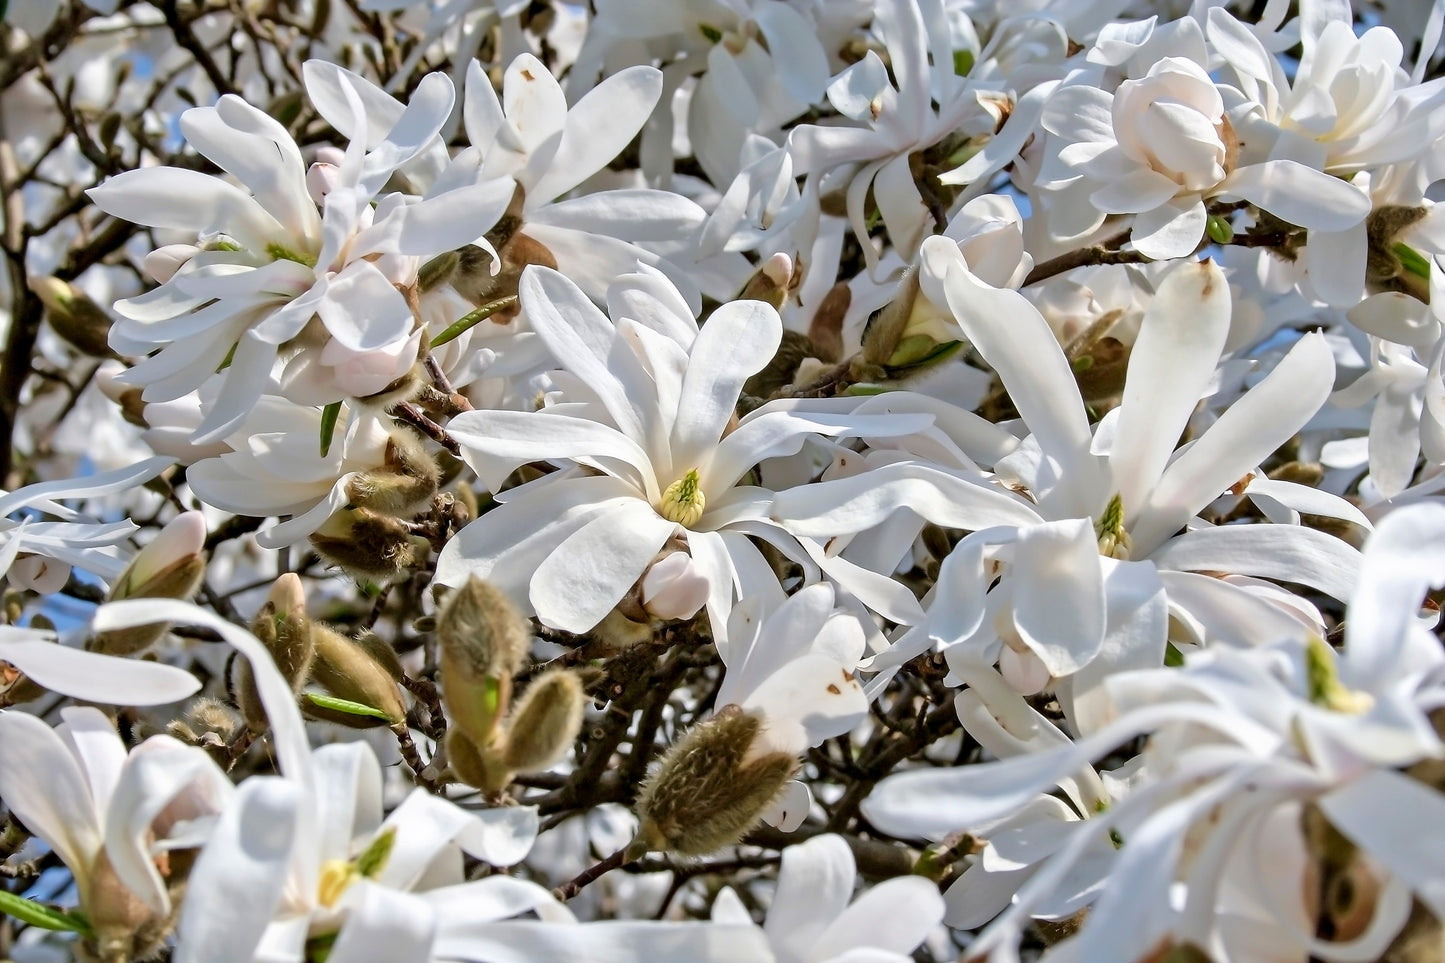 5 STAR MAGNOLIA Stellata TREE Seeds - Fragrant White to Pink Big 4" Wide Flowers